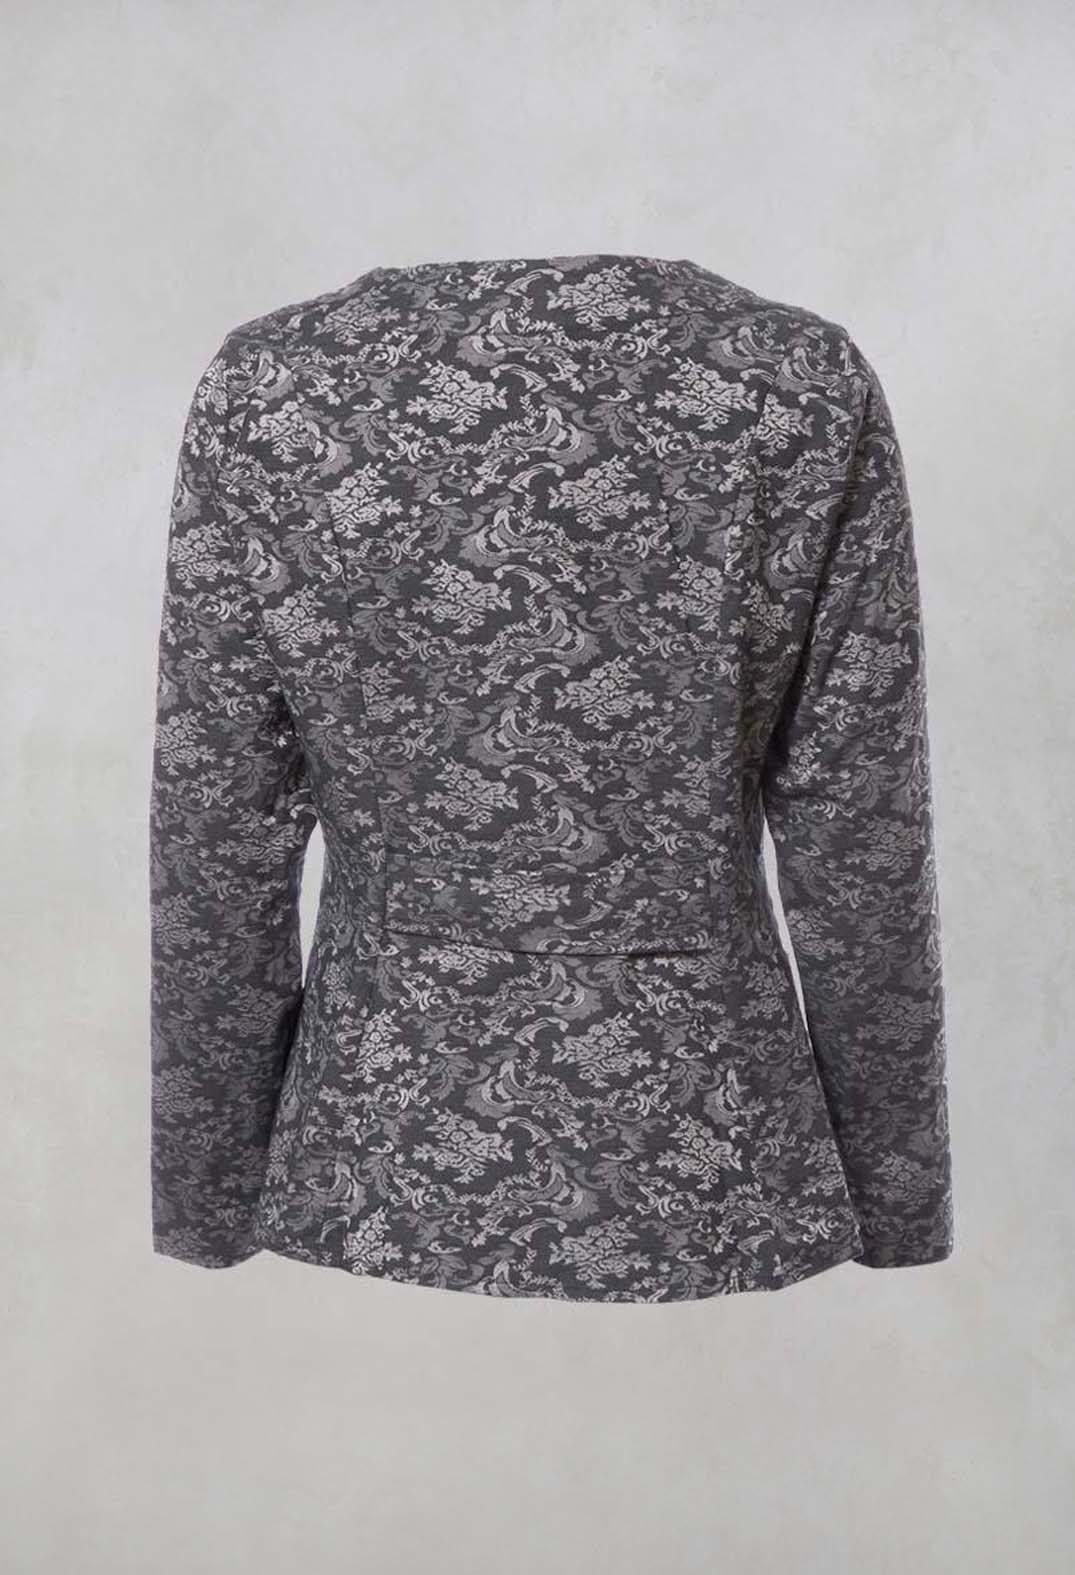 Printed Collarless Cropped Jacket in Charcoal